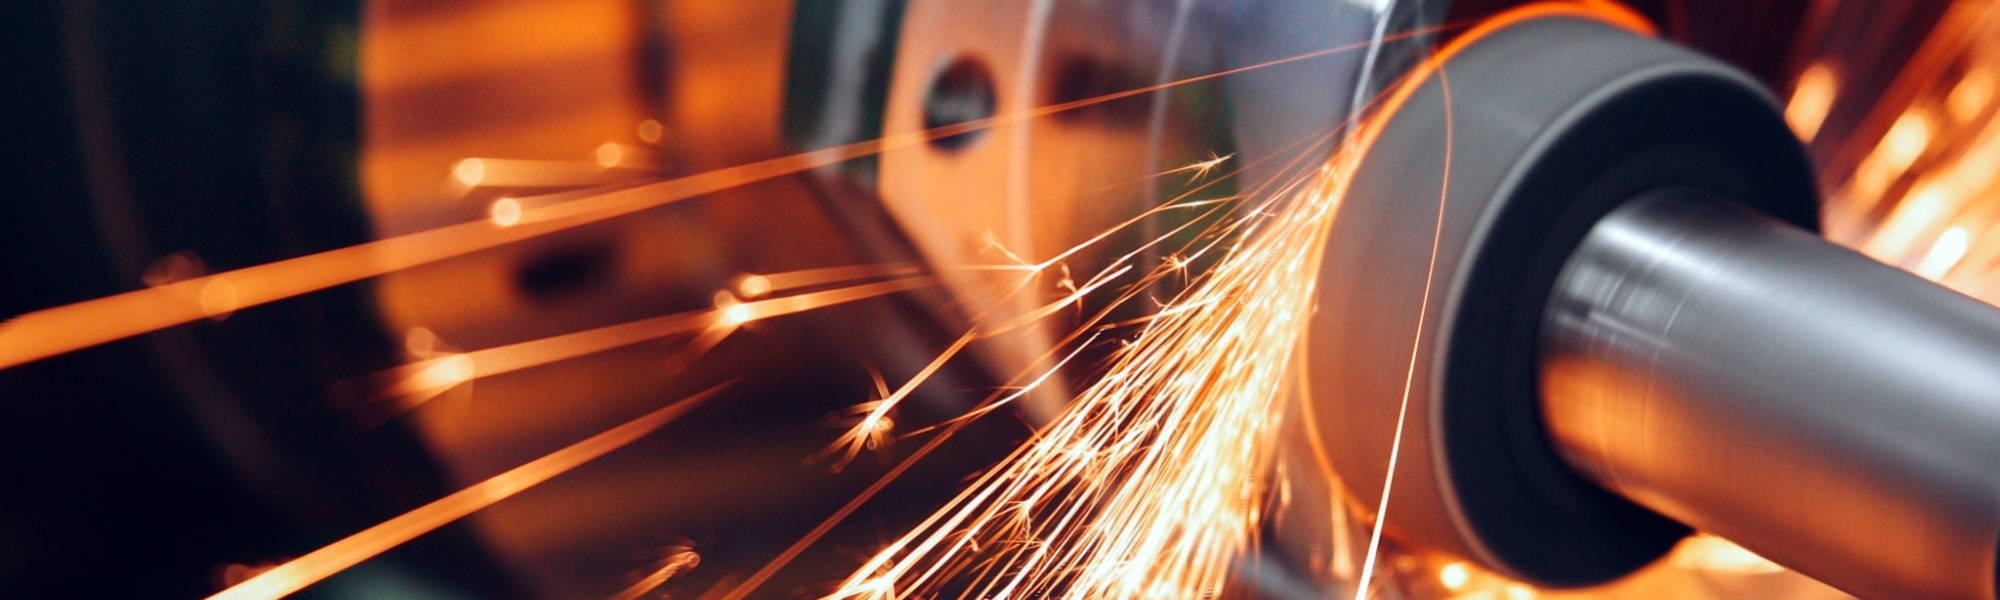 sparks flying while machine griding and finishing metal in factory, manufacturing, engineering